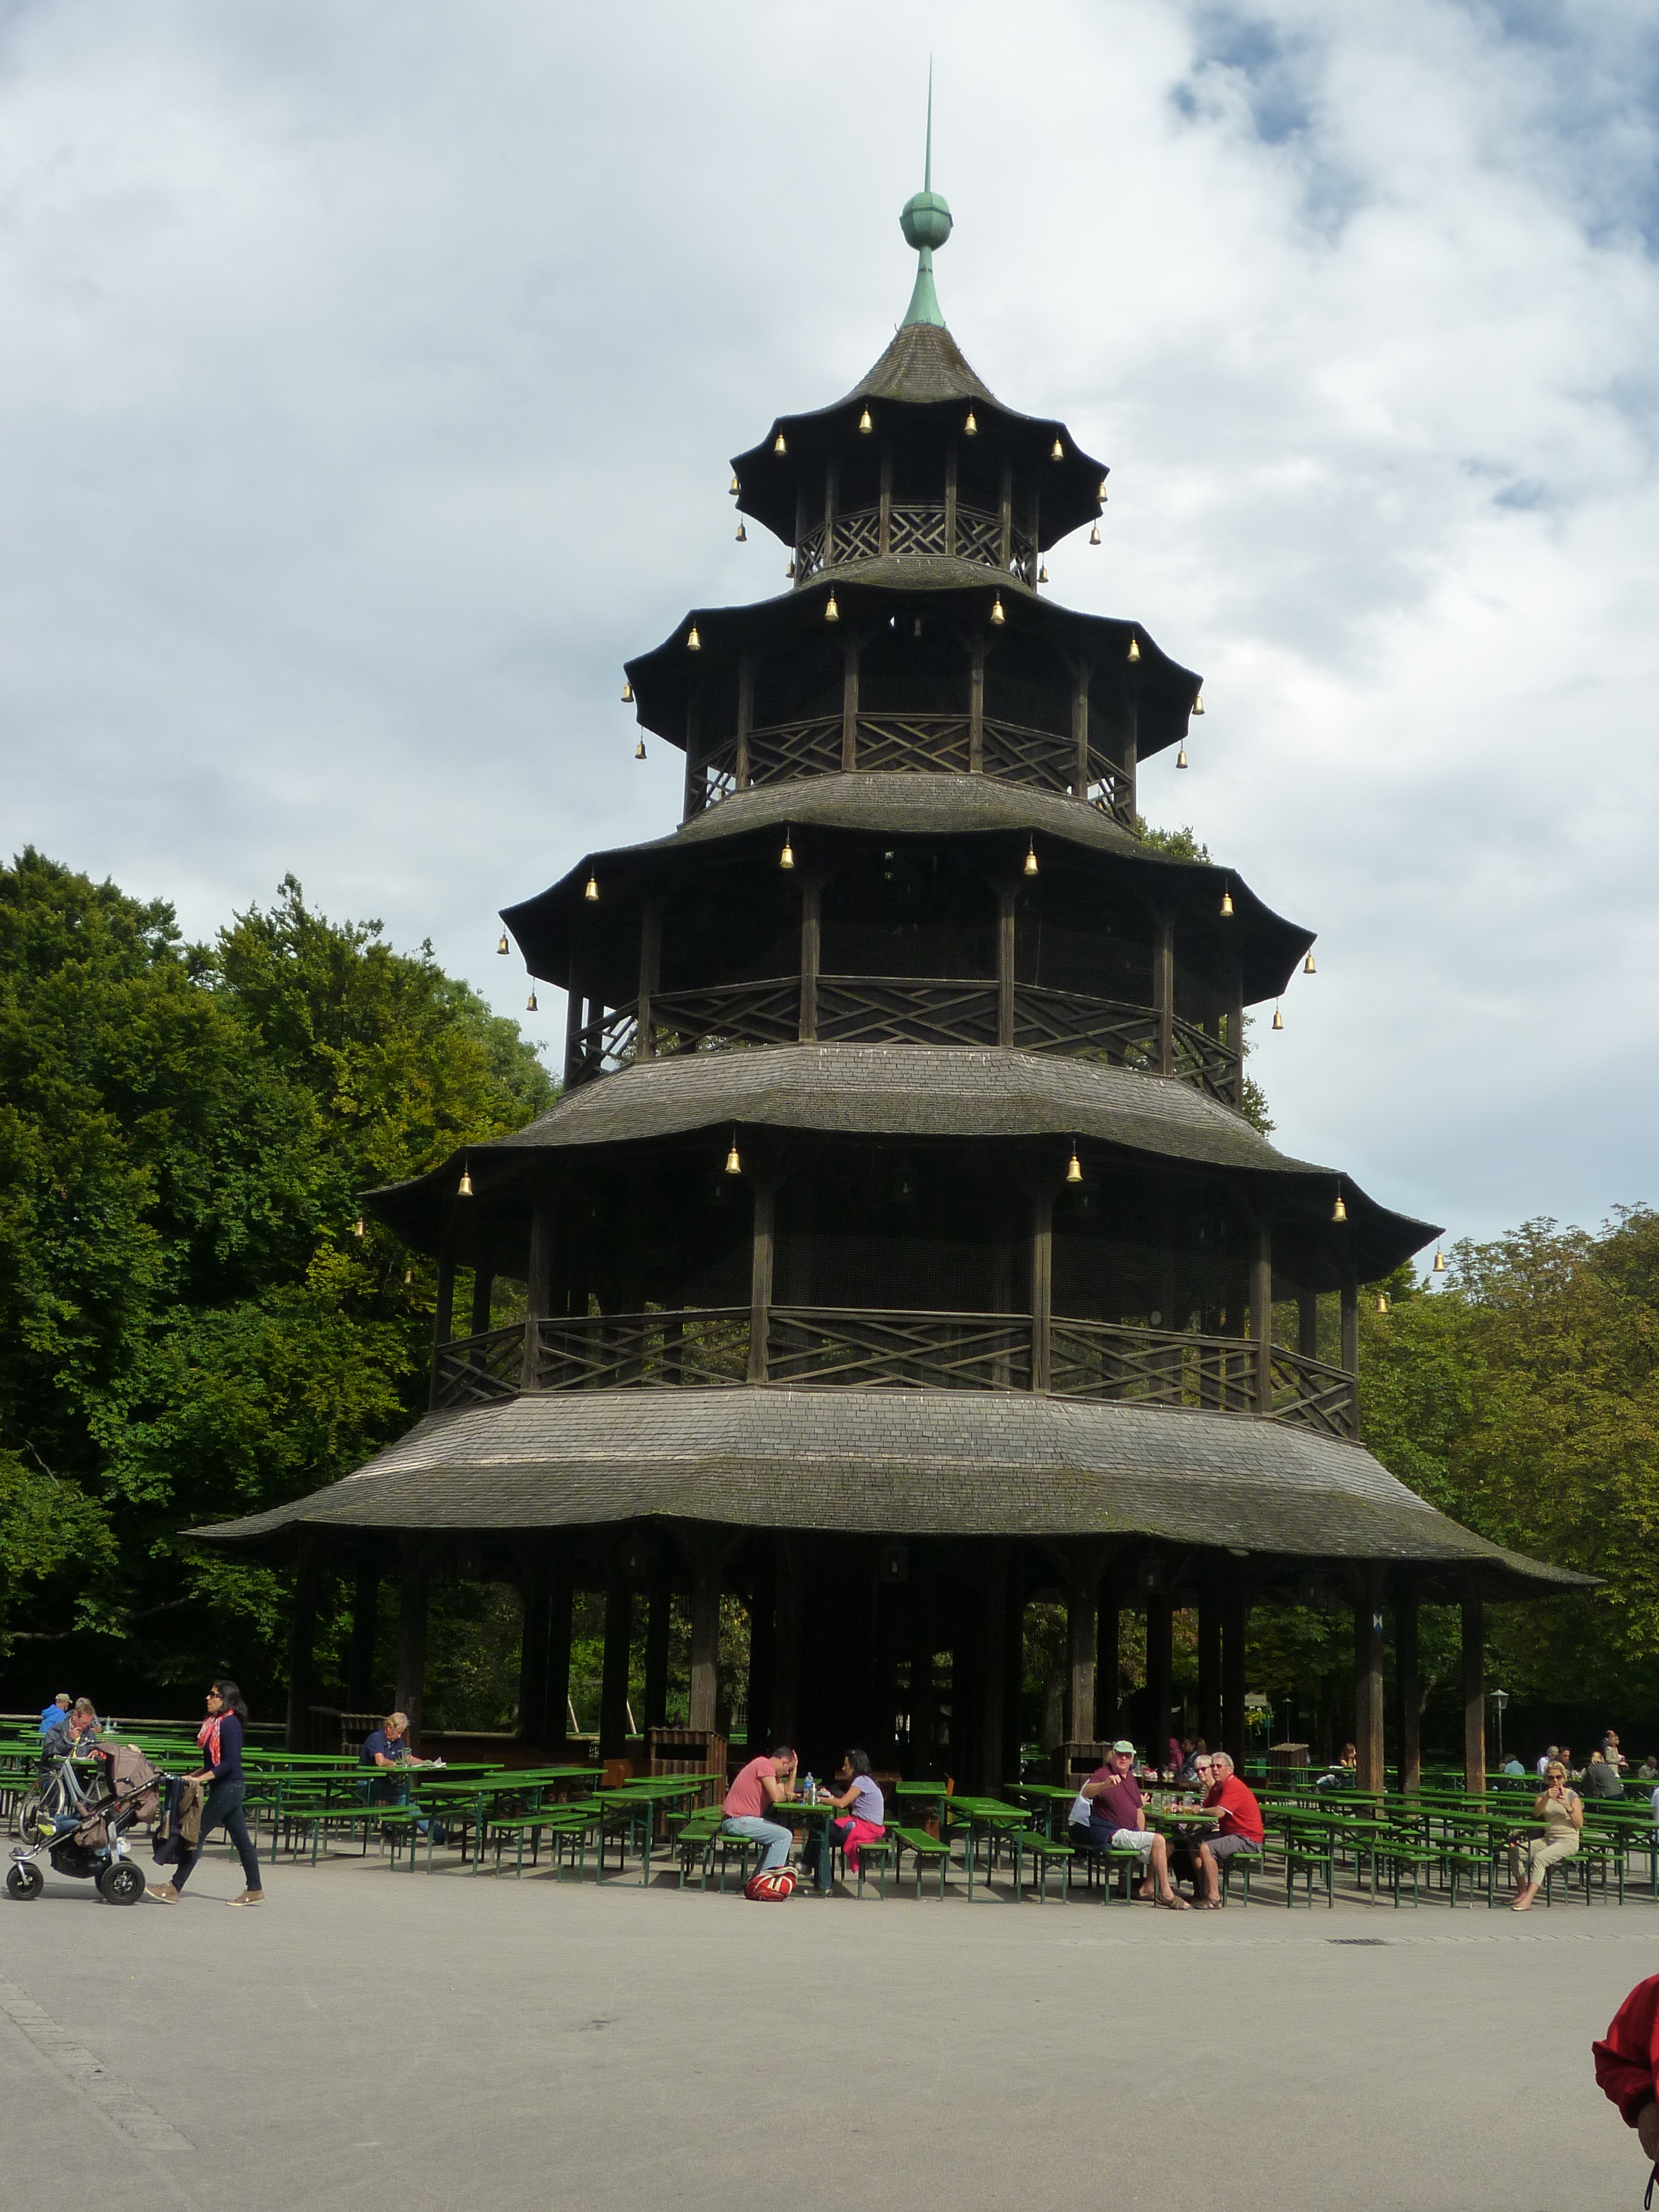 A Londoner from Afar Goes to Munich1 - The Chinese Tower and Beer Garden